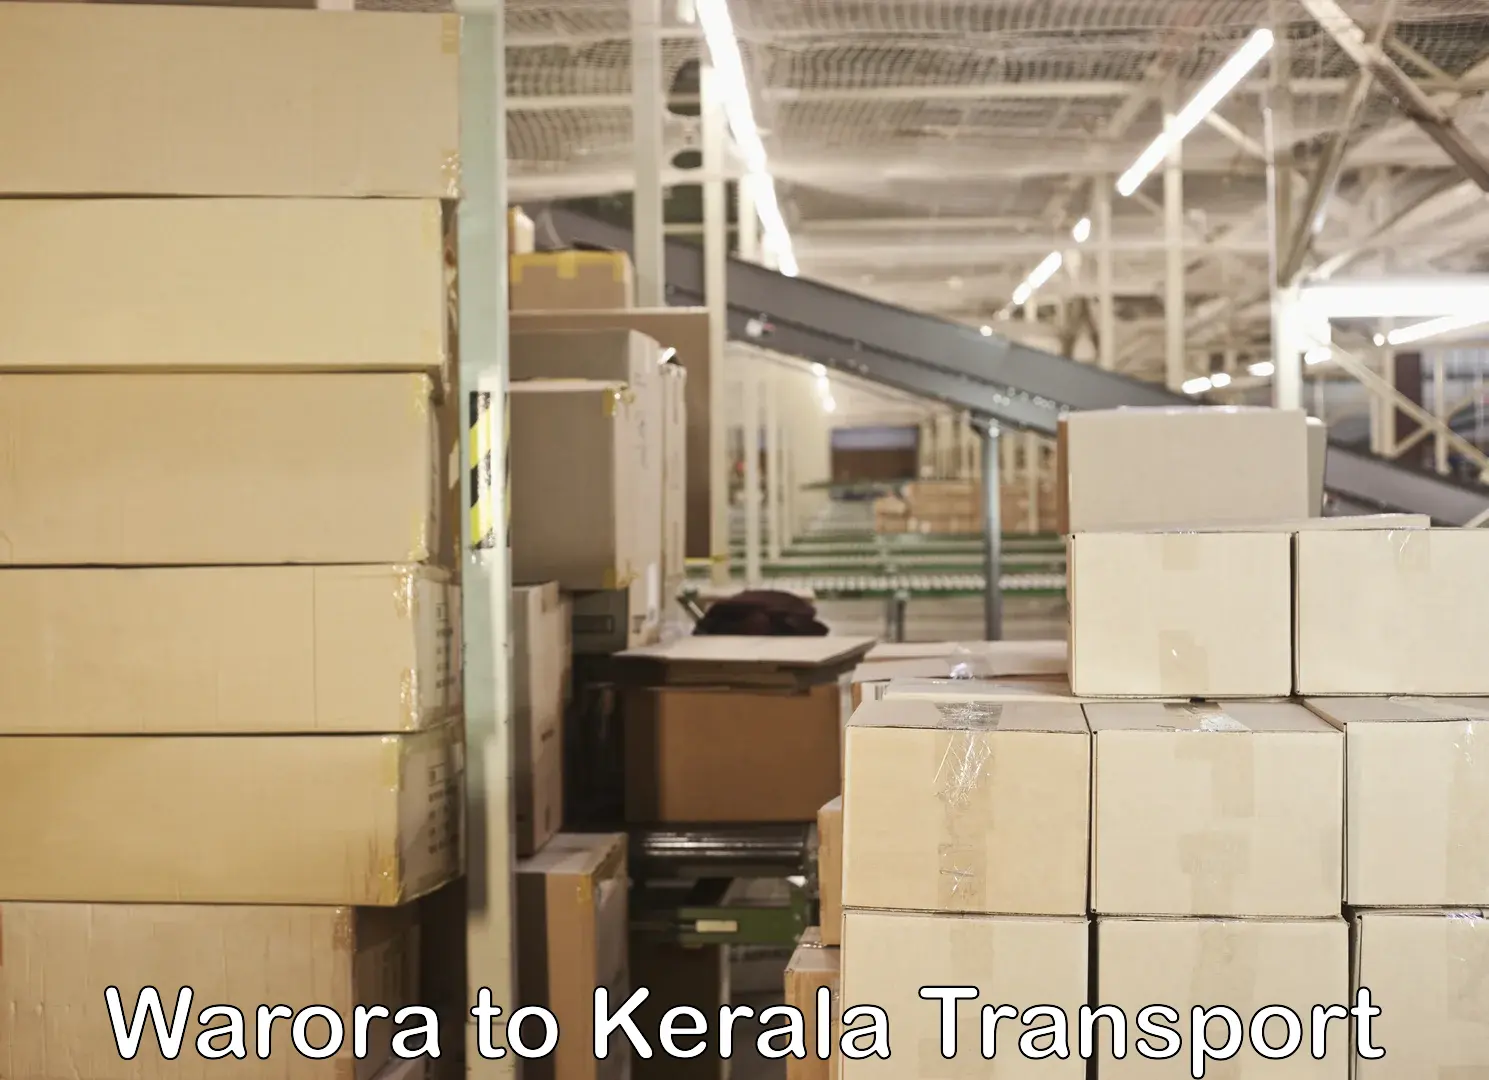 Transport bike from one state to another Warora to Kerala